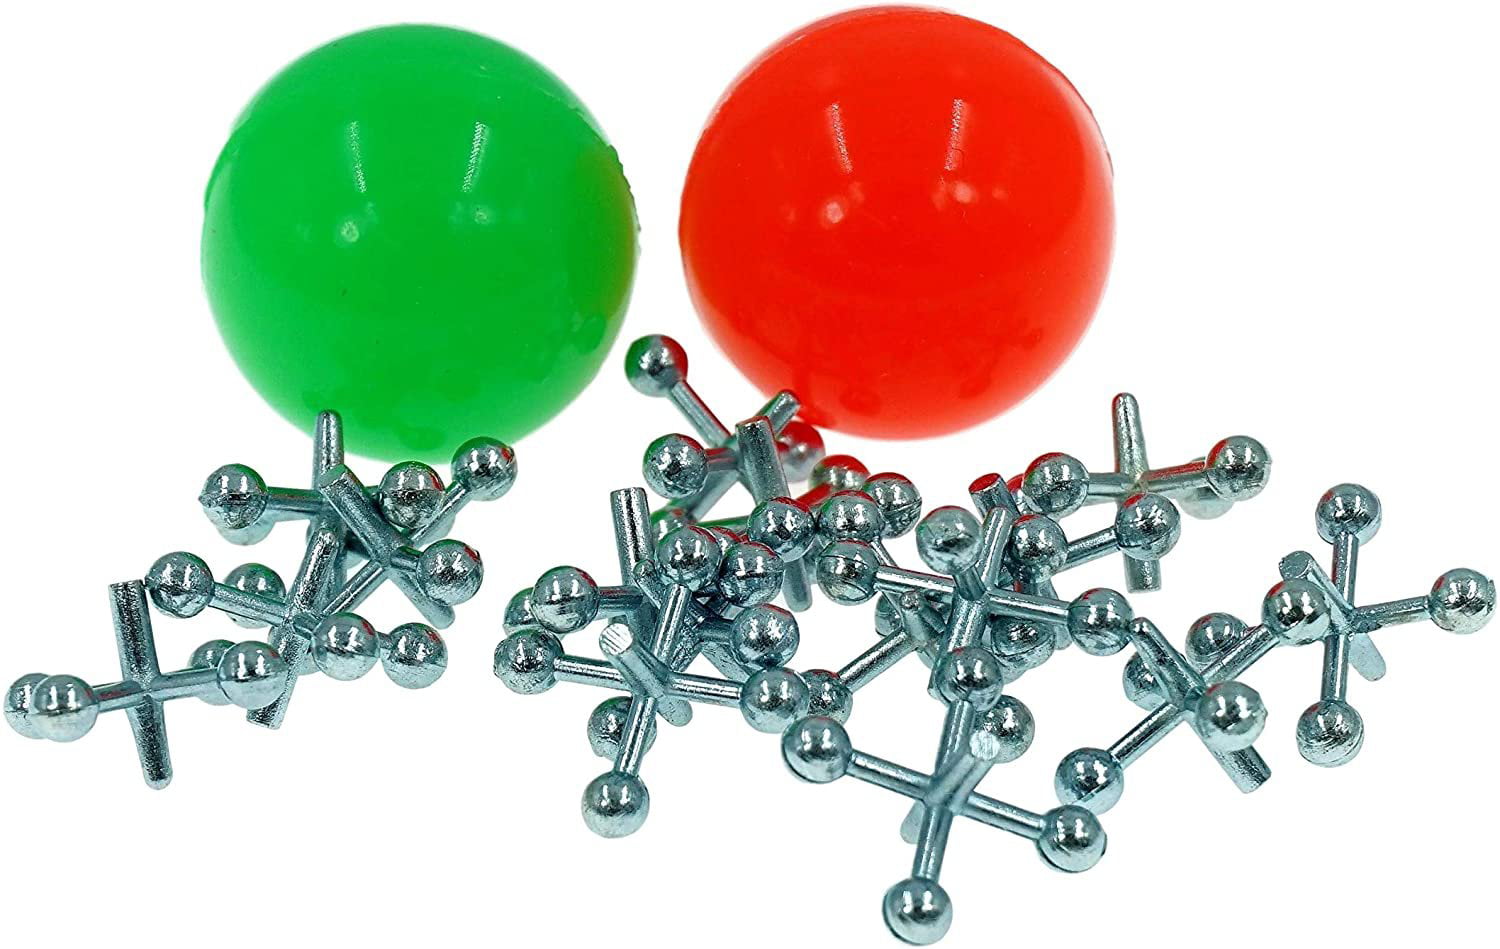 Game Prizes Classic Game of Jacks for Party Favor Kids and Adult of All Ages TEUN 4 Sets Retro Metal Jacks and Ball Game- 40 Pcs Gold and Silver Toned Jacks with 4 Red Rubber Bouncy Balls 